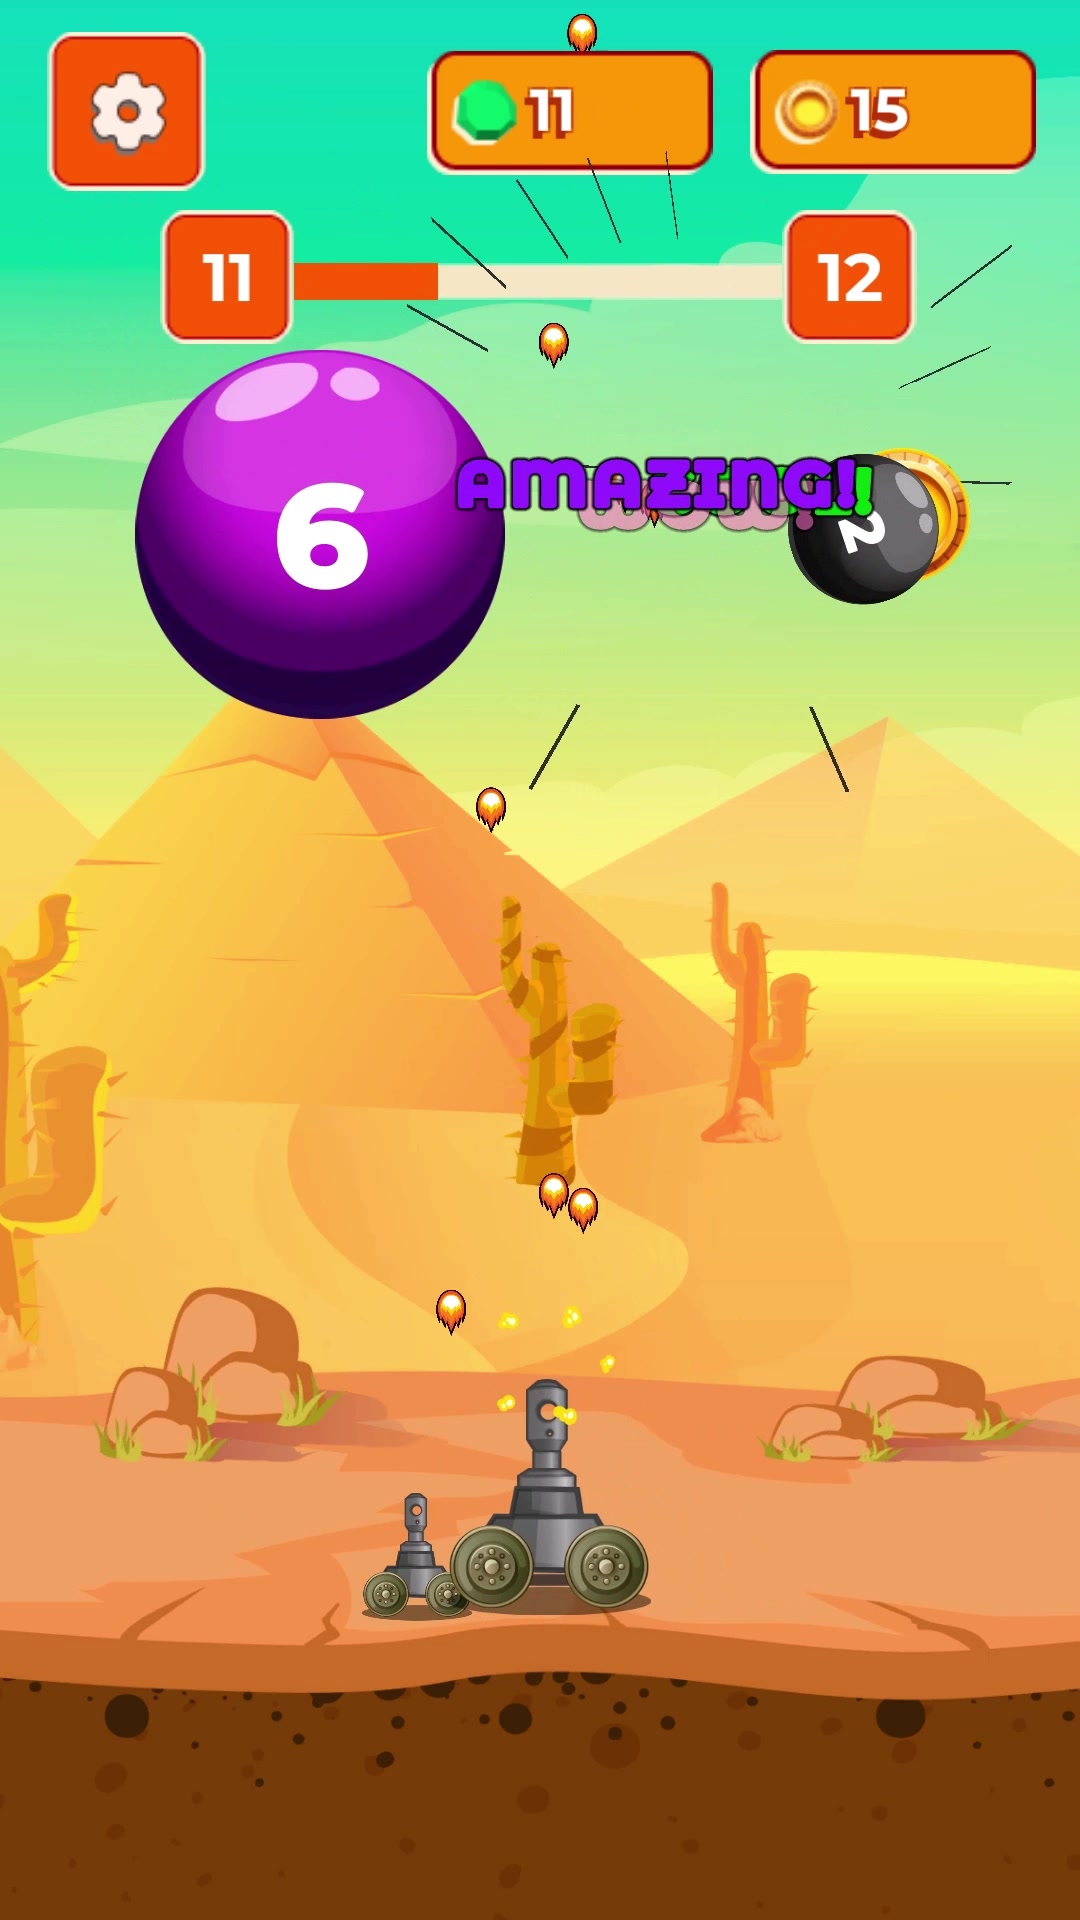 Bubble Shooter Pro — play online for free on Yandex Games